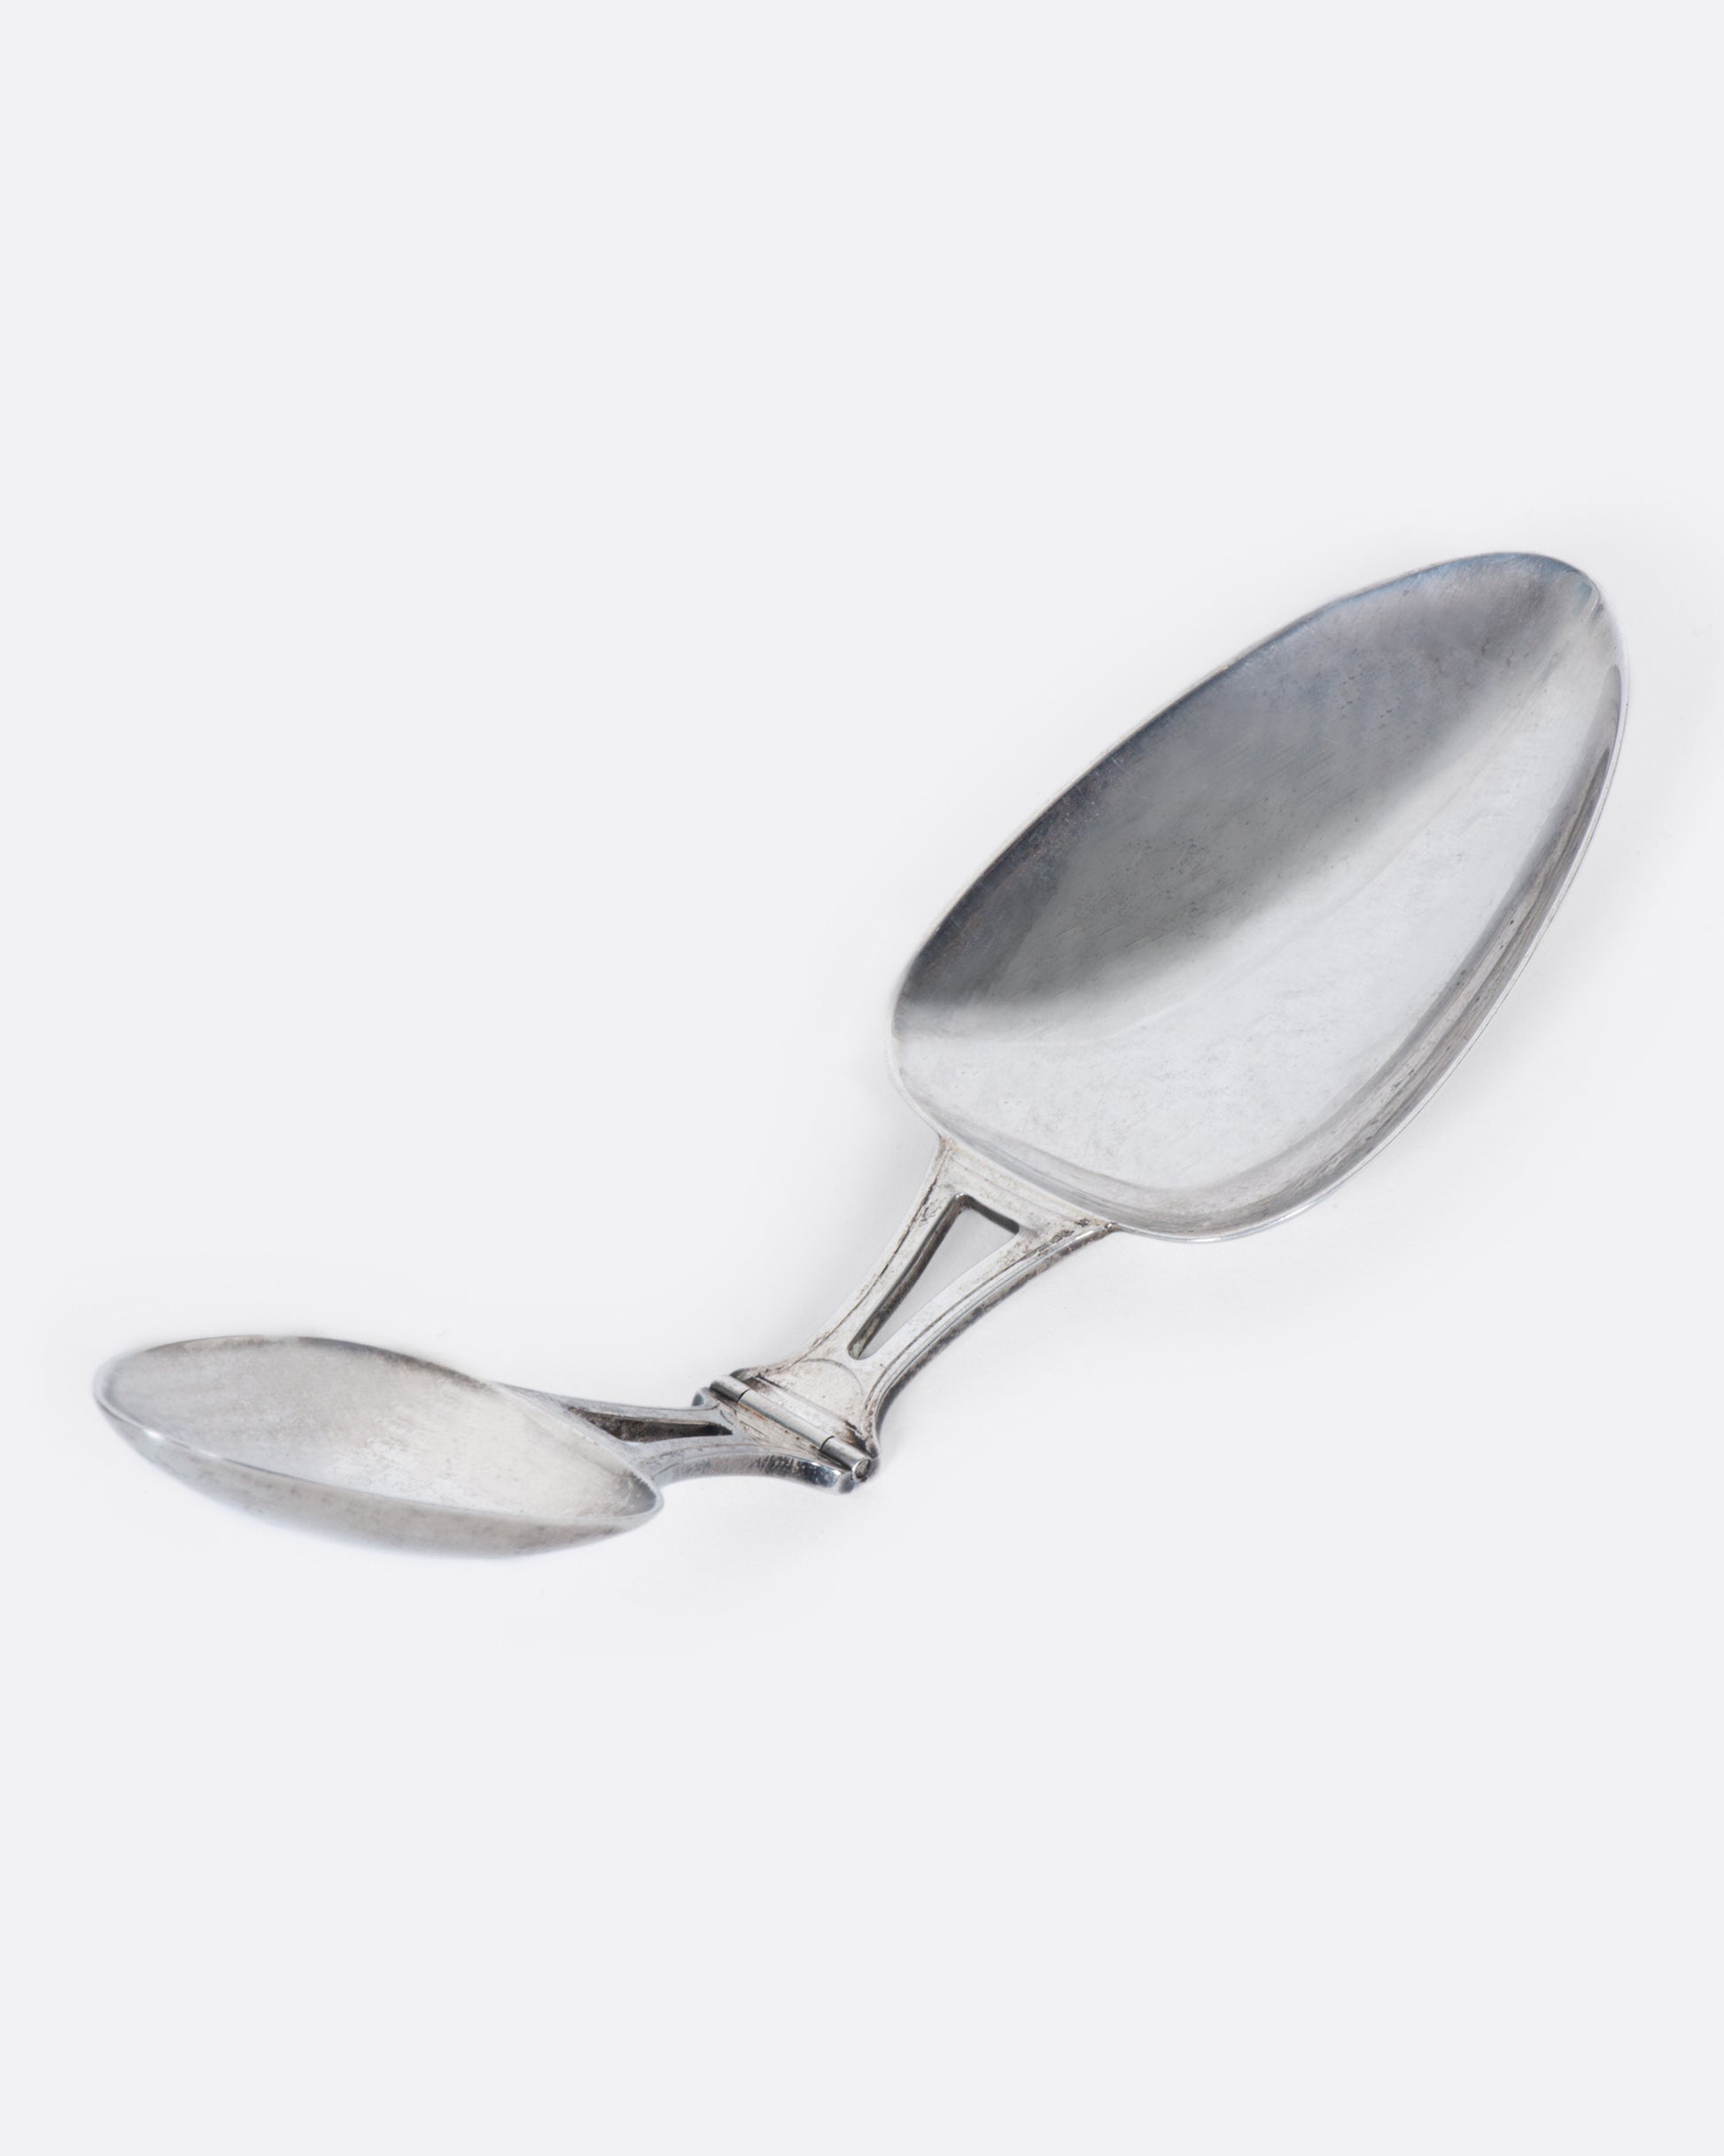 A sterling silver folding spoon with a teaspoon on one side and a tablespoon on the other.